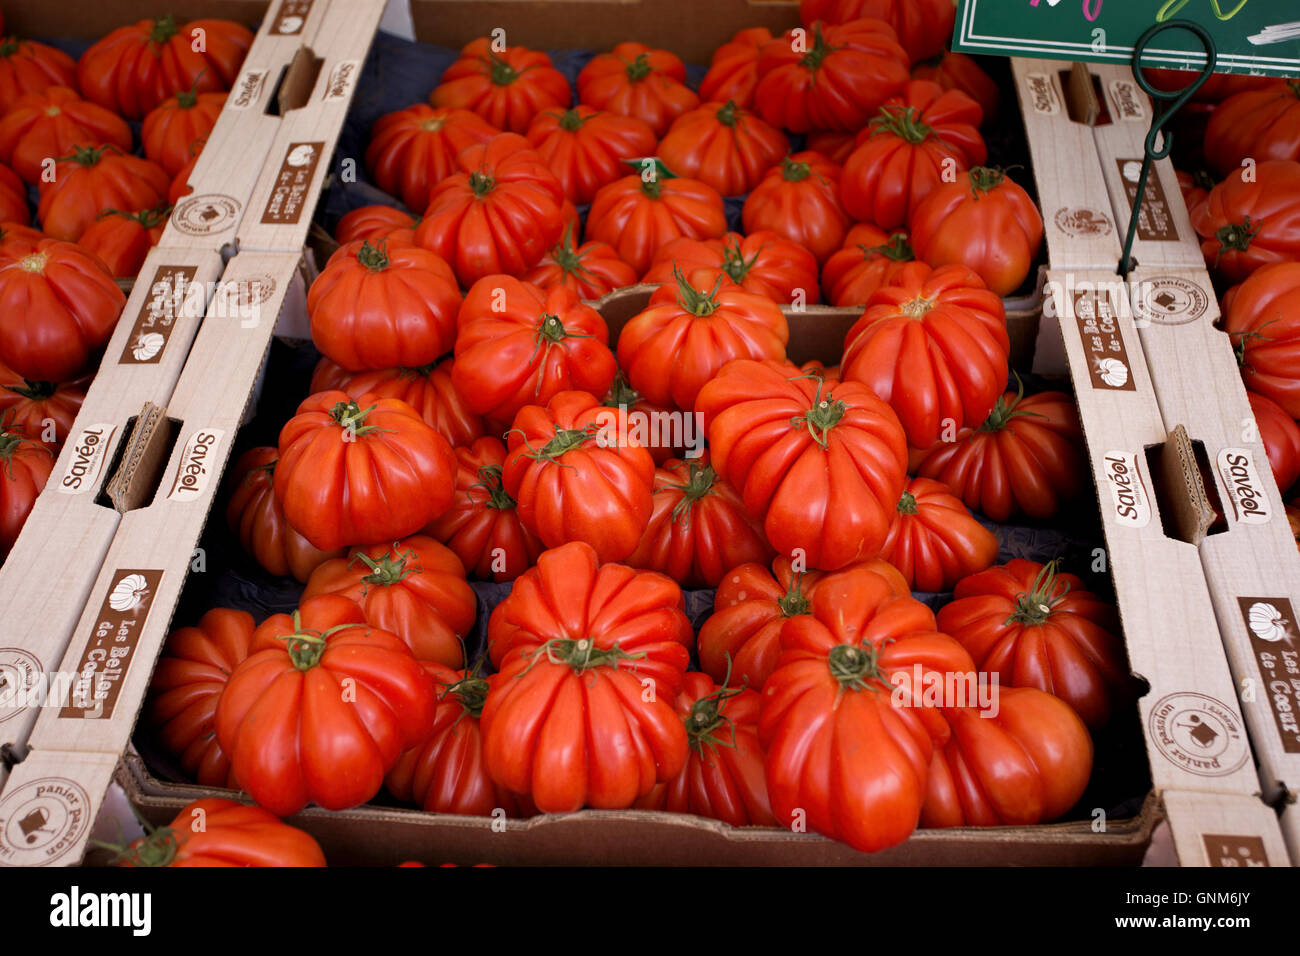 Boxes of large Oxheart tomatoes on a French market stall Stock Photo